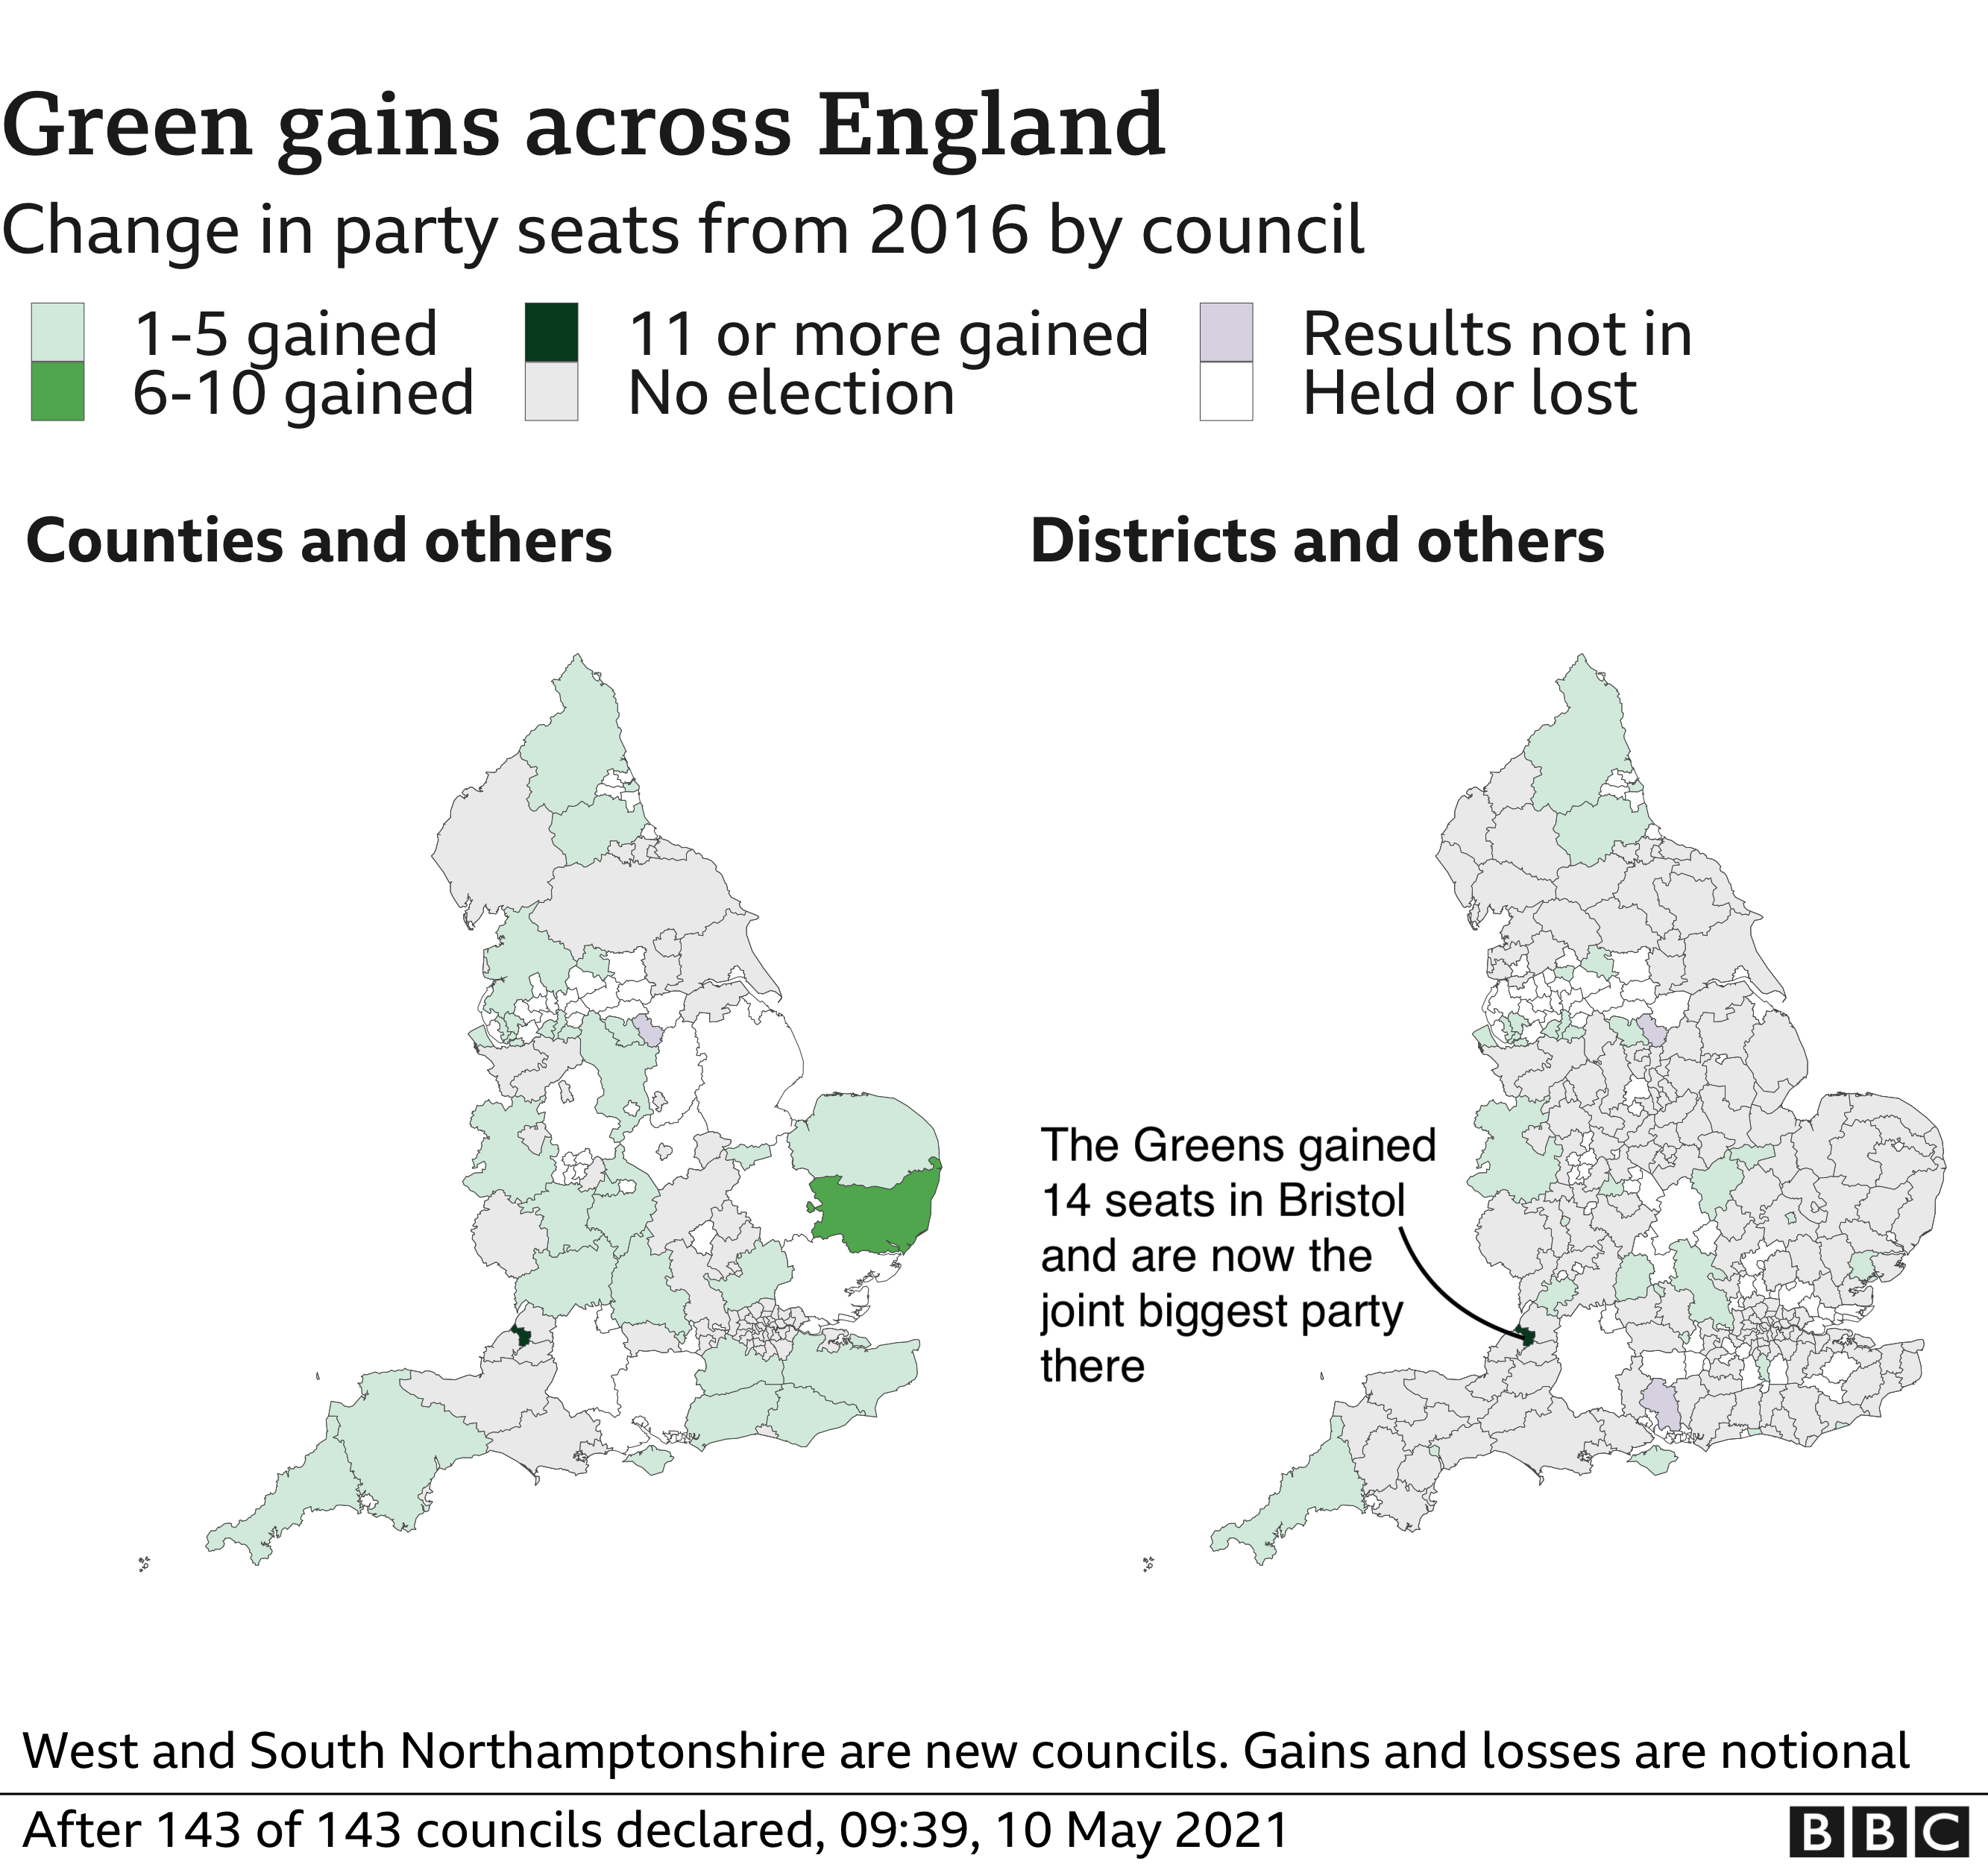 Green gains in England - they are now the joint biggest party in Bristol after gaining 14 seats from Labour